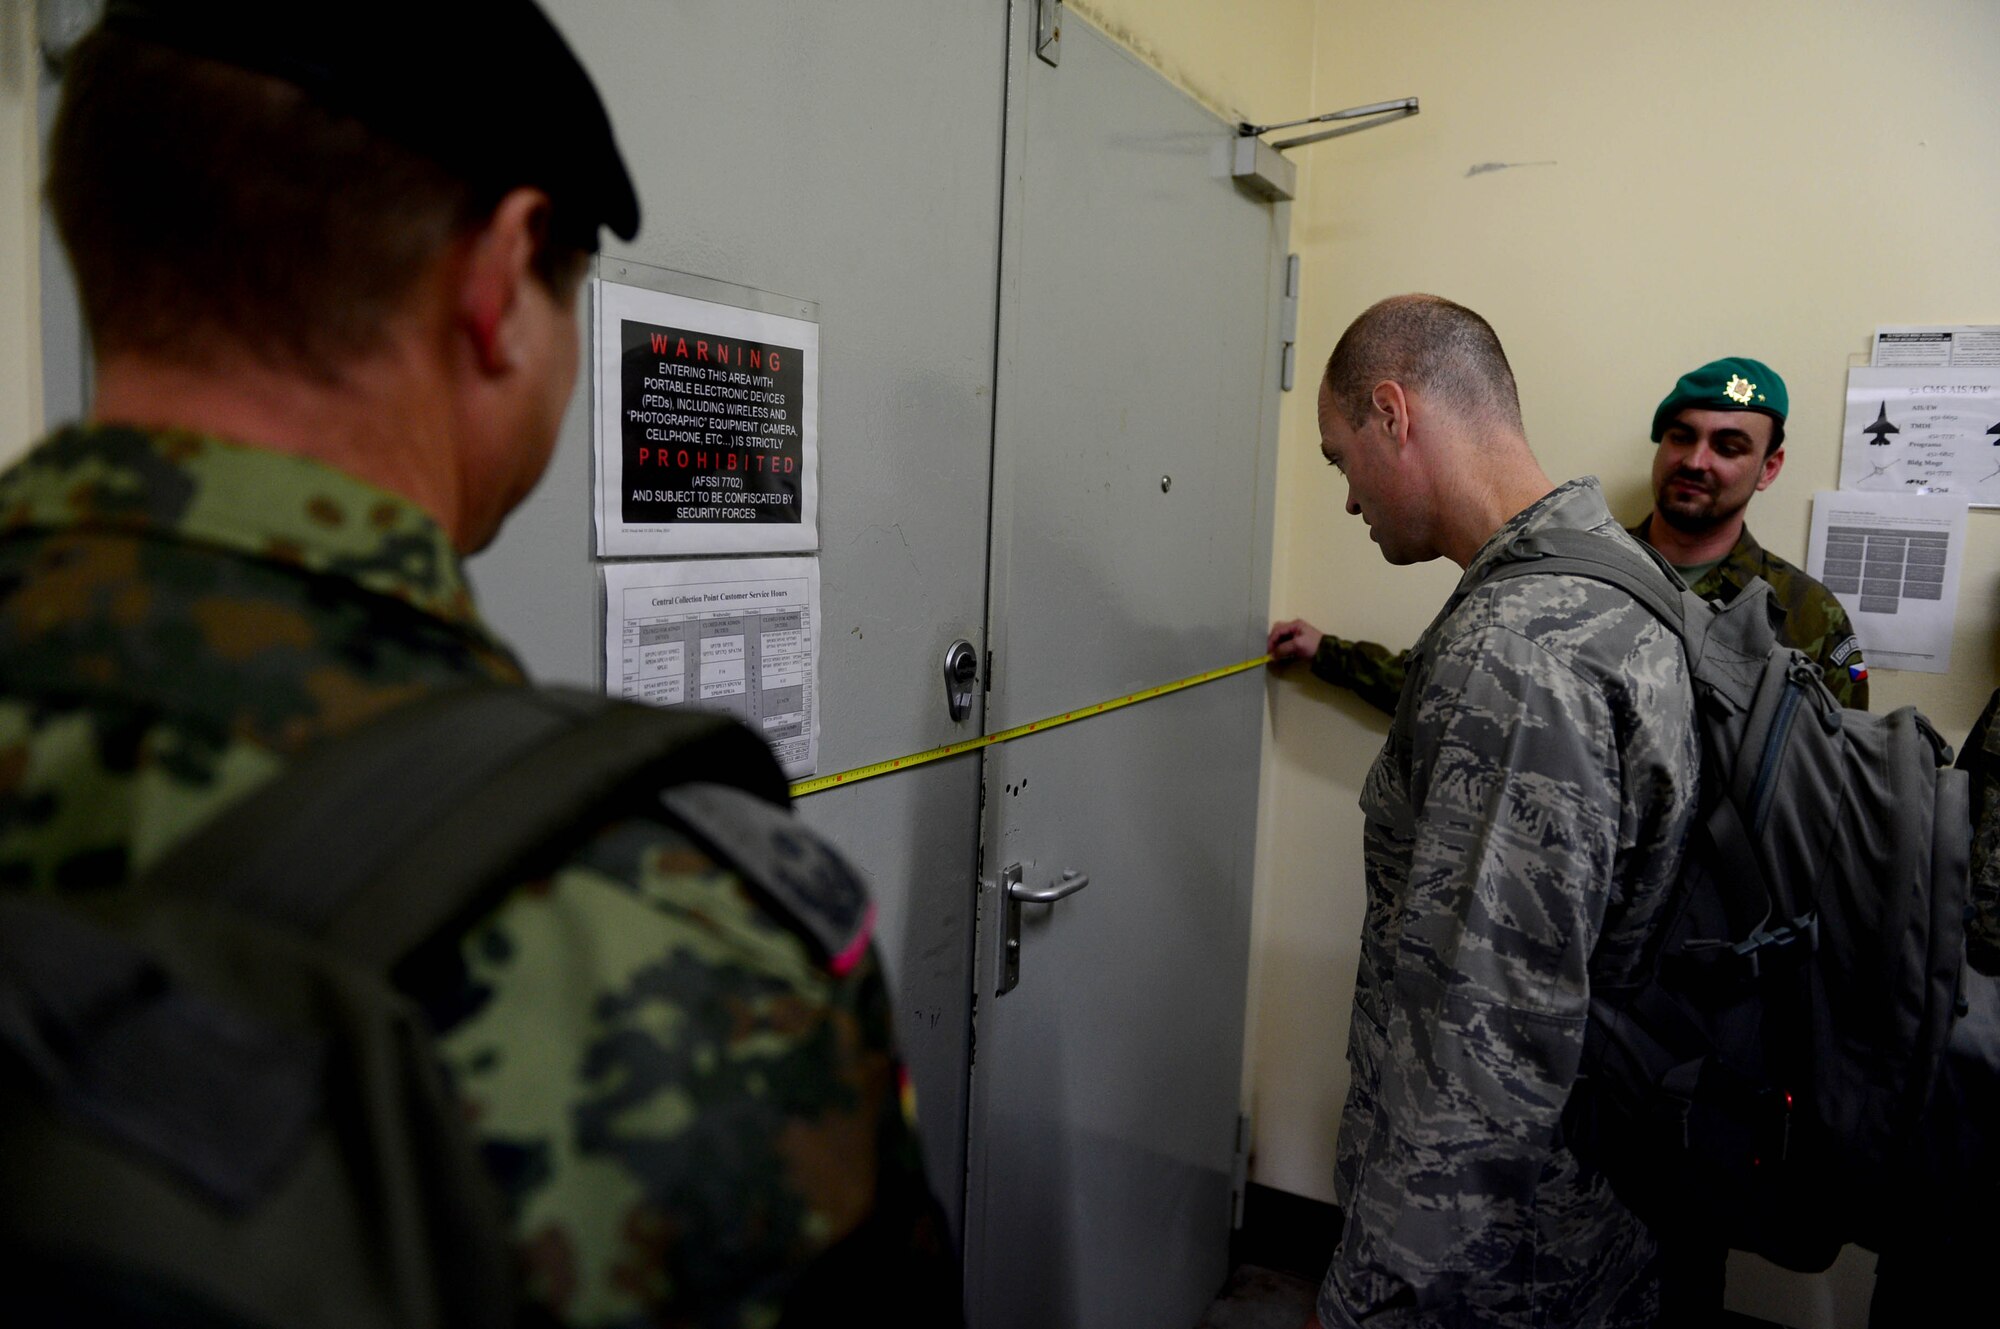 Inspectors from the Conventional Armed Forces in Europe treaty verification team measure an entrance door during an exercise at Spangdahlem Air Base, Germany, Sept. 29, 2014. Inspectors ensure treaty compliance by inspecting random buildings for excessive amounts of warfighting equipment. Inspectors maintain full access to any building with an entrance of two meters or greater in width. (U.S. Air Force photo by Airman 1st Class Kyle Gese/Released)